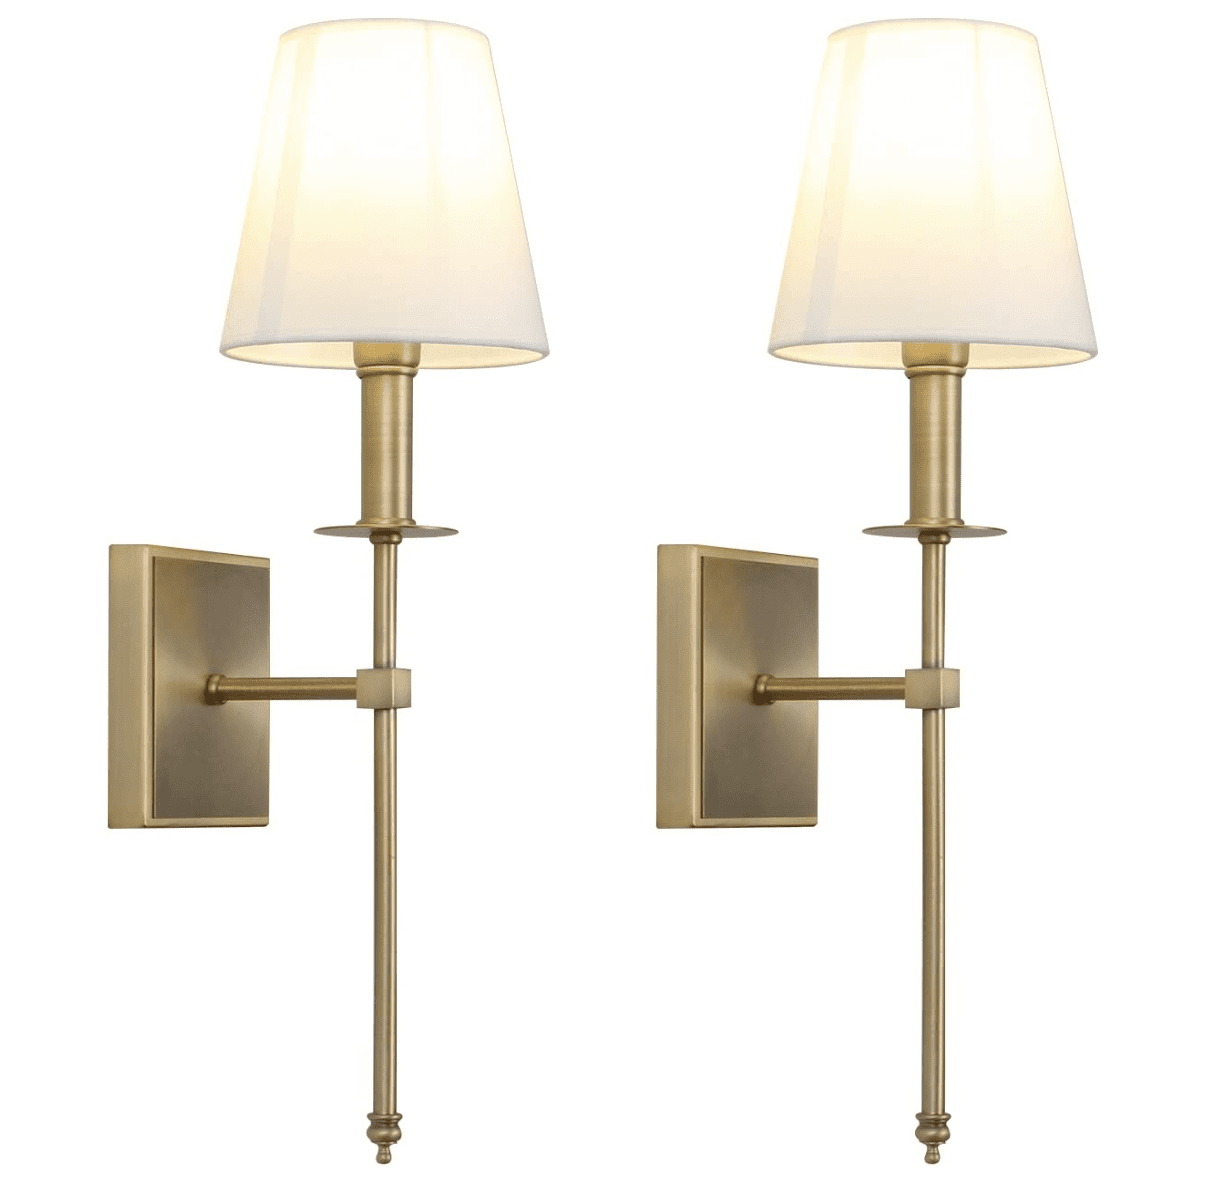 Antique Brass Cordless Wall Sconce with Black Metal Shade - Loft